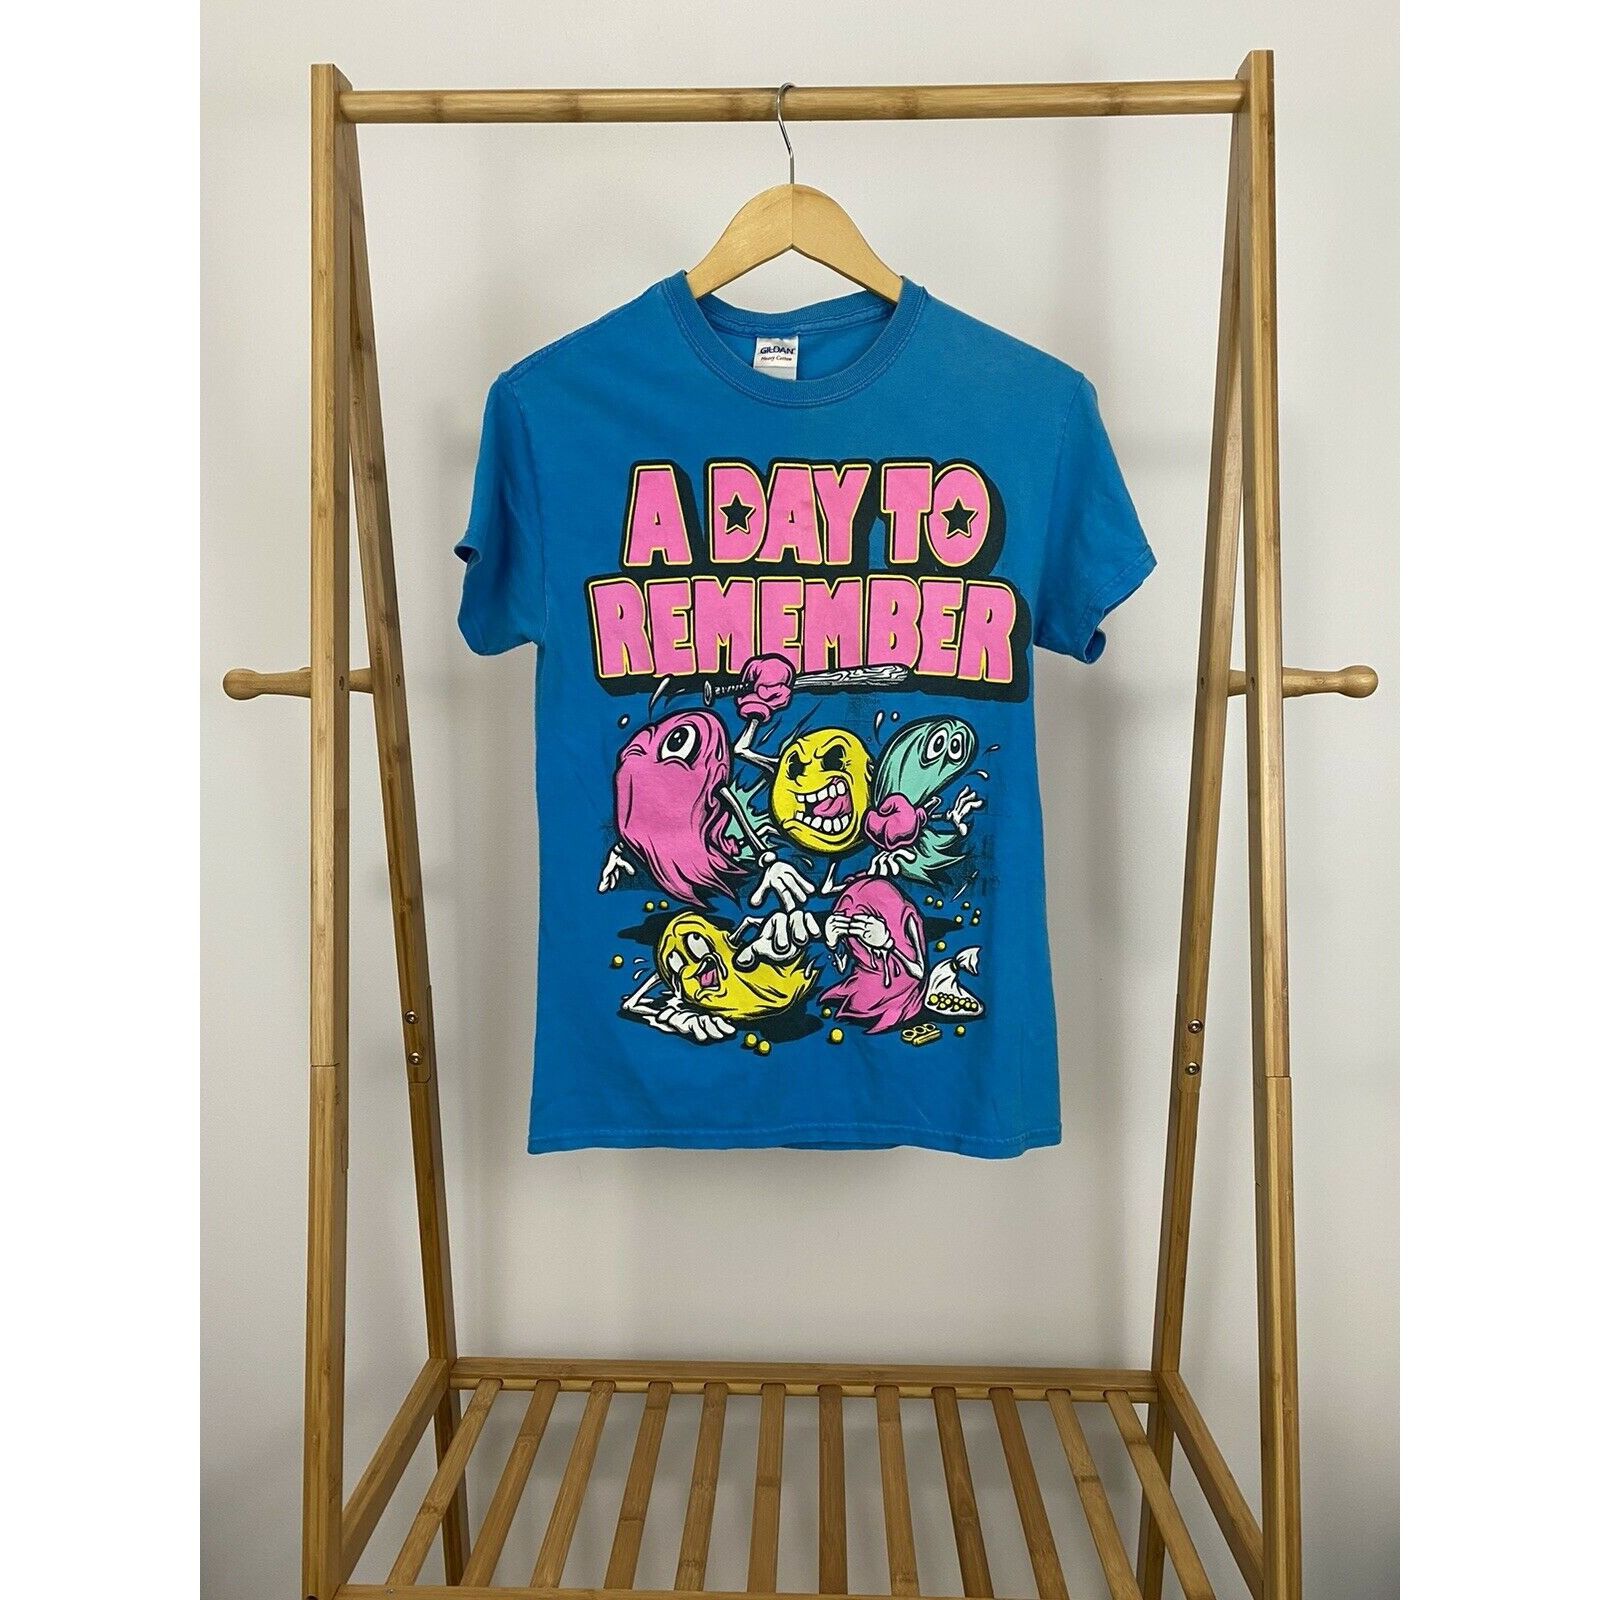 vintage a day to remember shirt XS - Gem